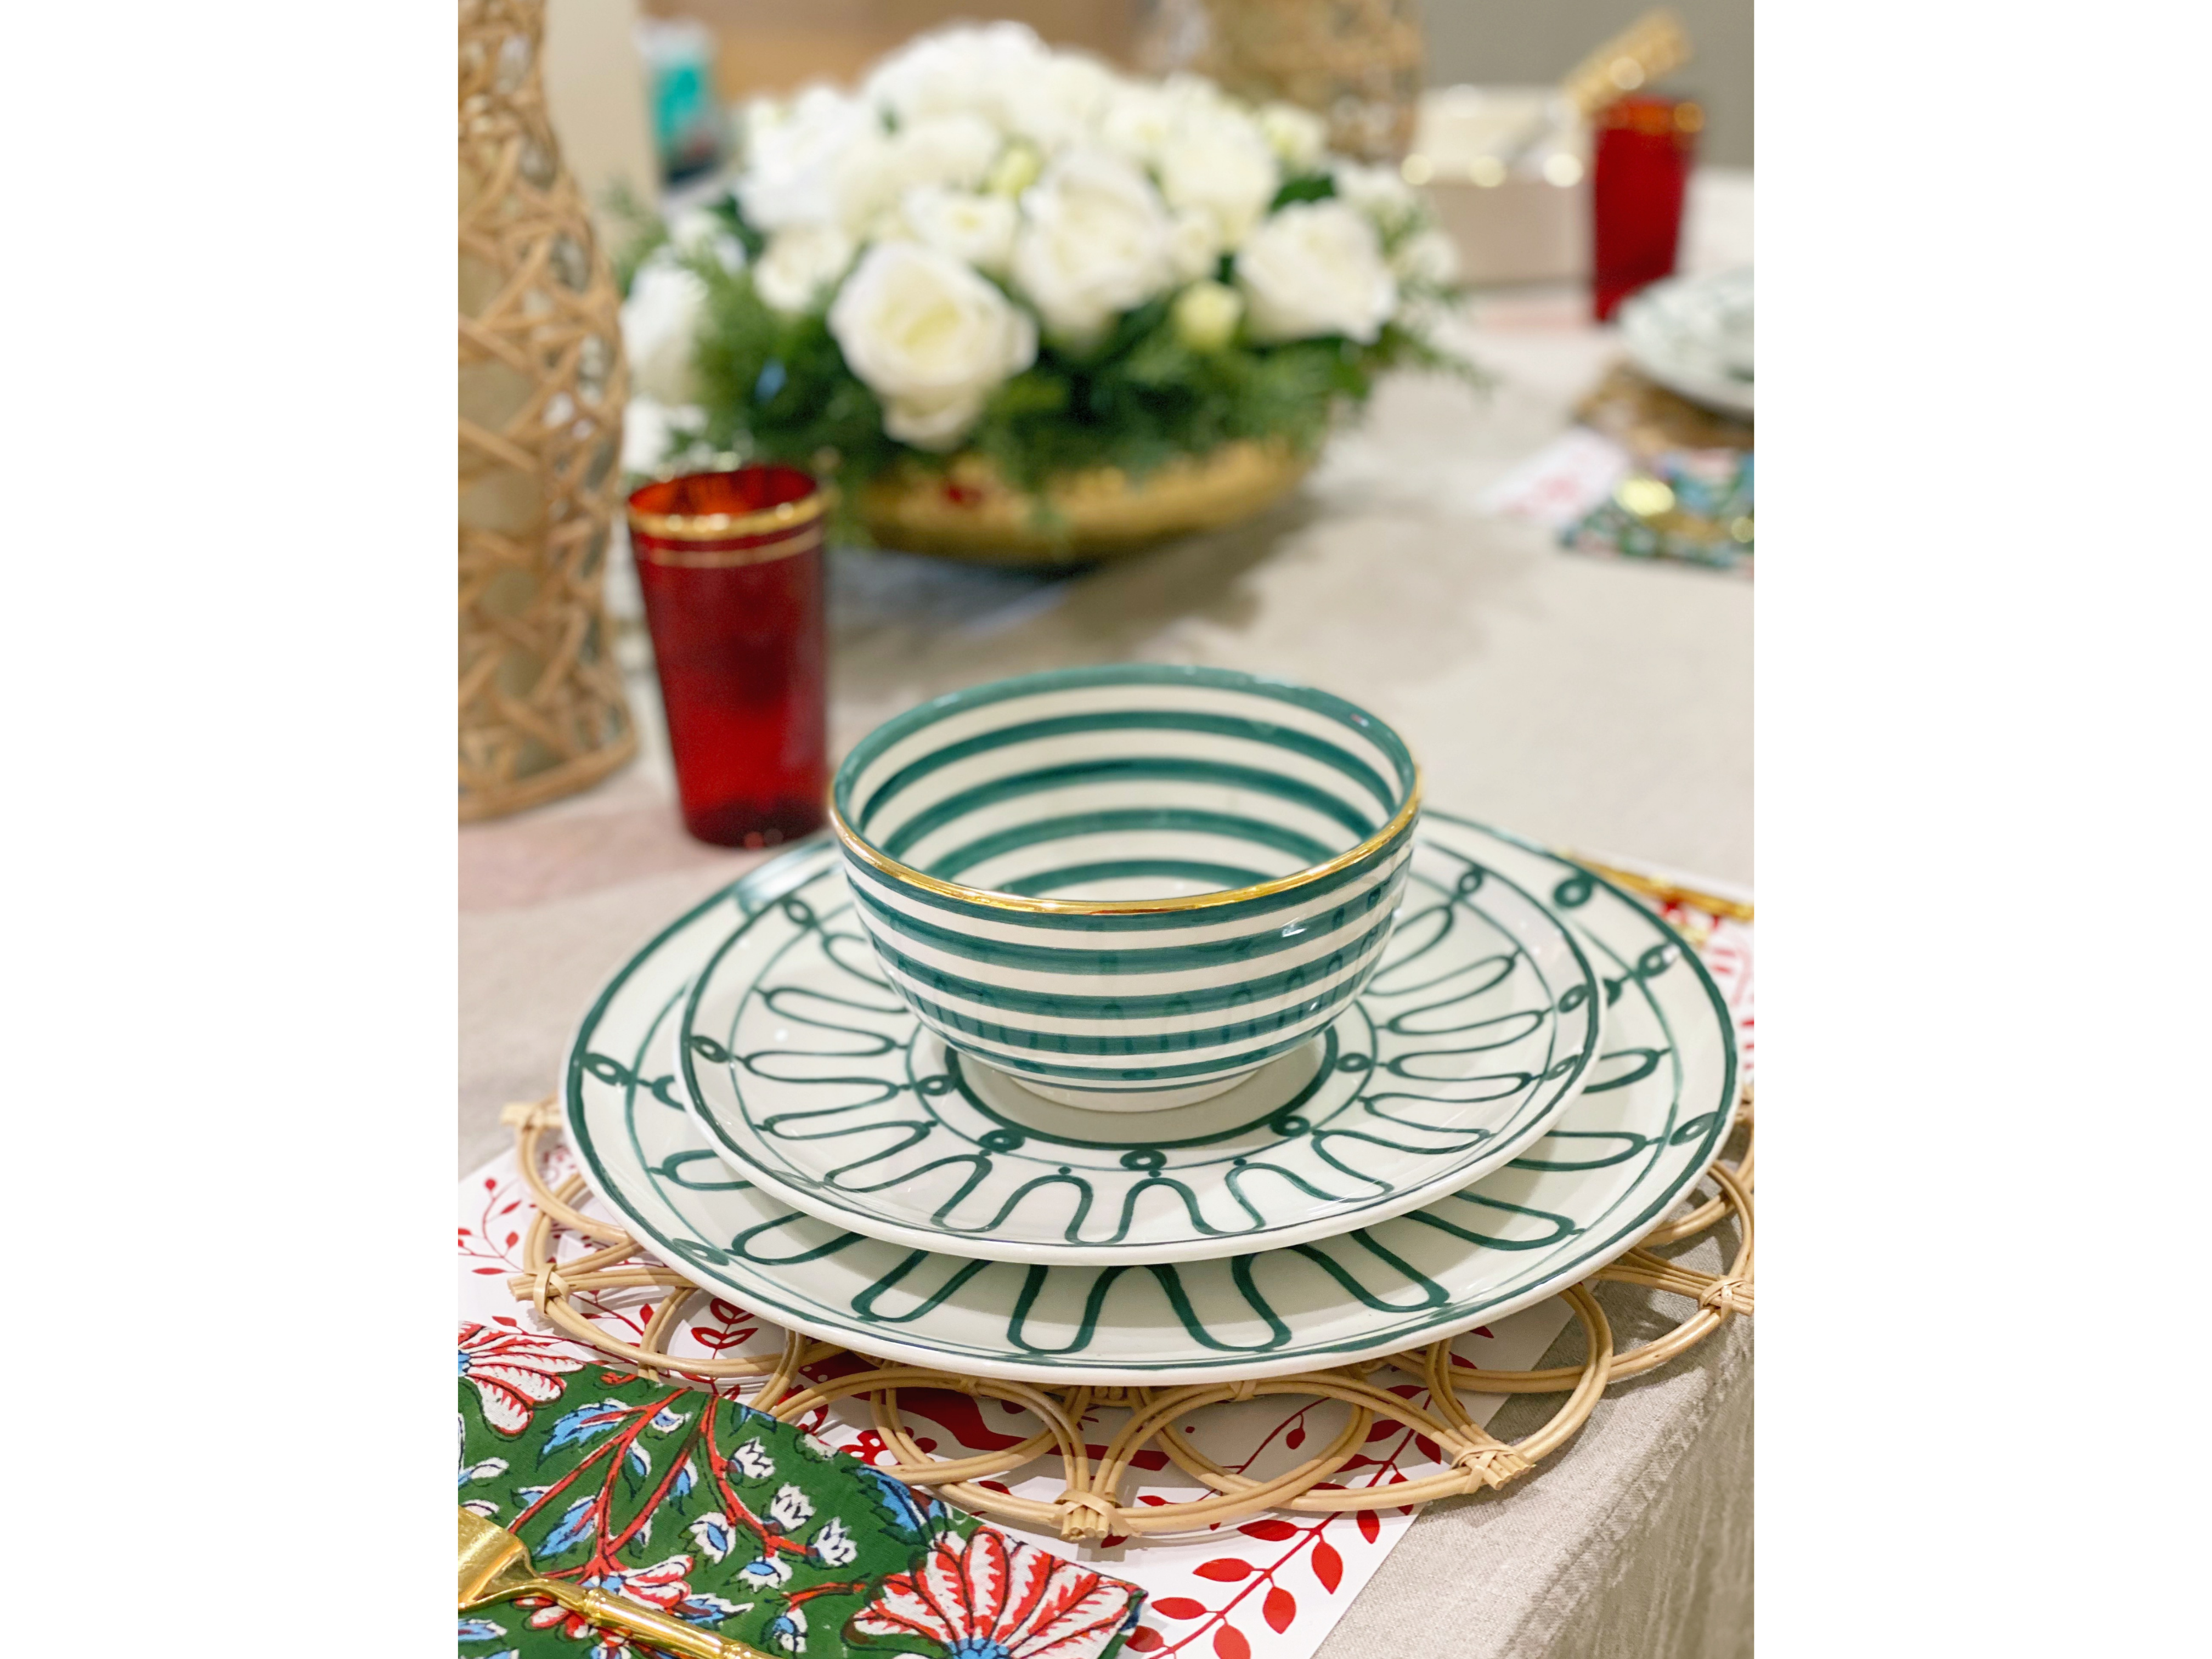 Holiday Table Setting Tips (even if it's just for your immediate family)